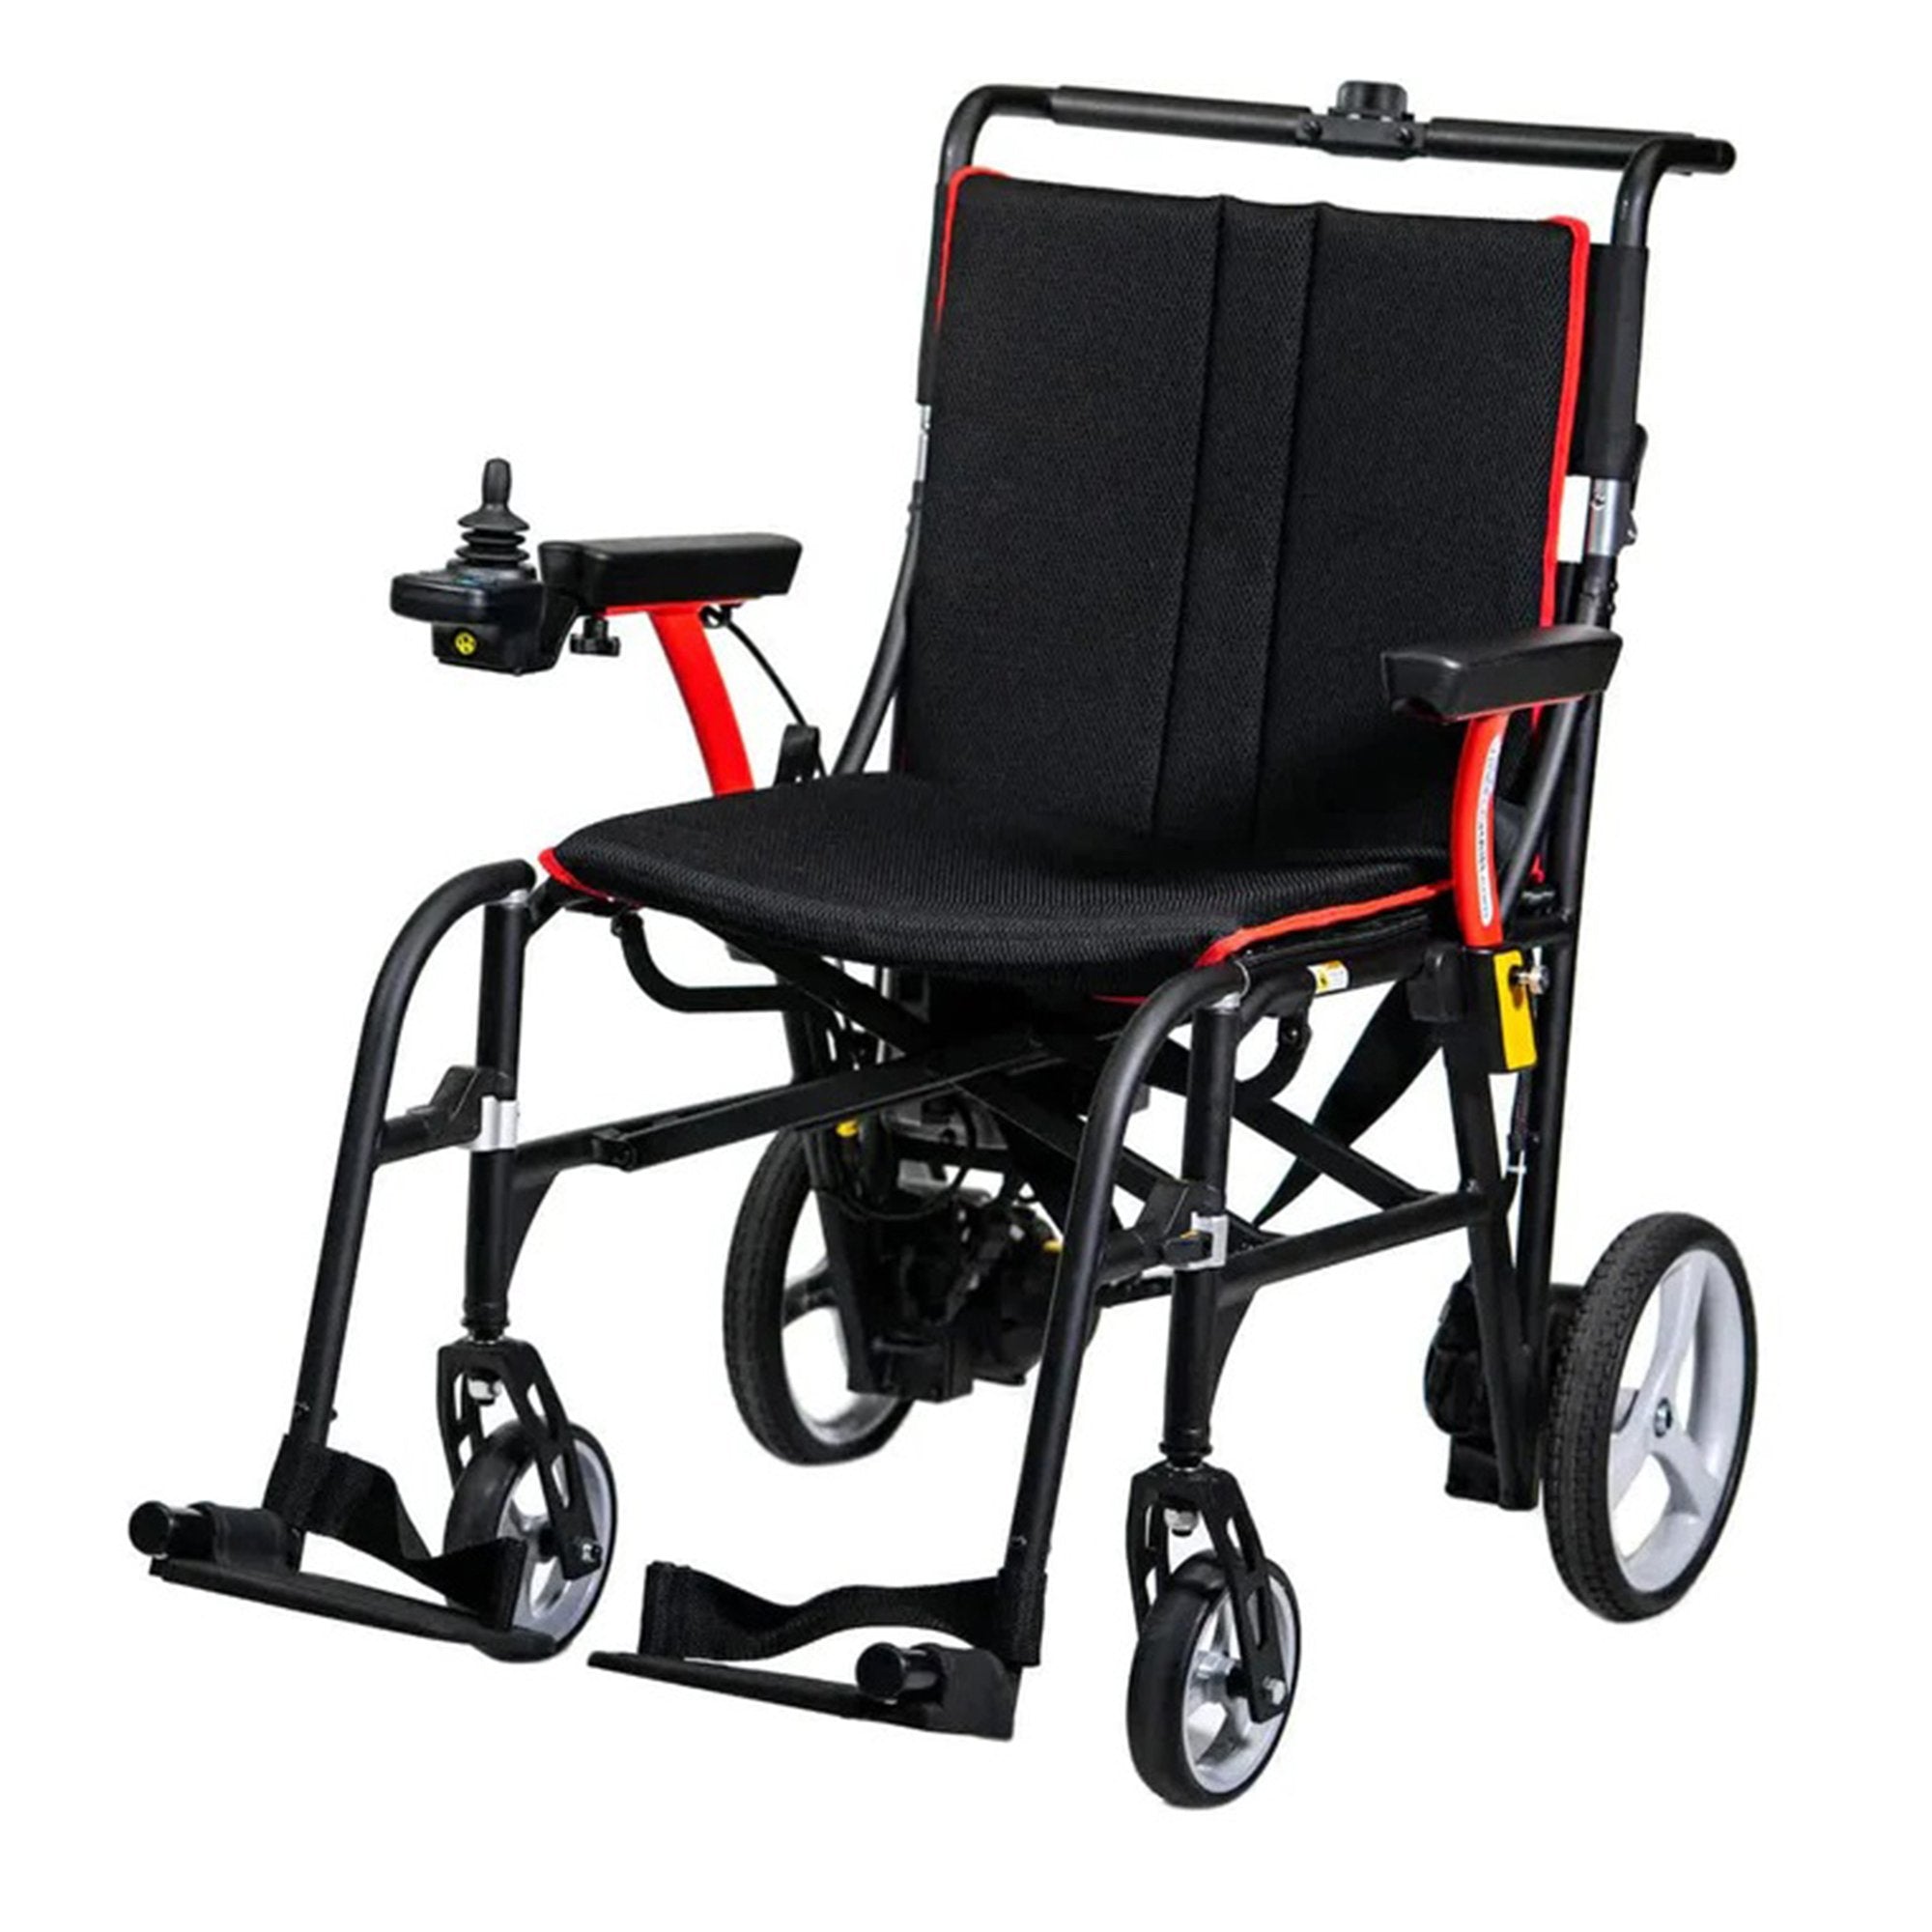 Feather Power Wheelchair, 18 Inch Seat Width (1 Unit)